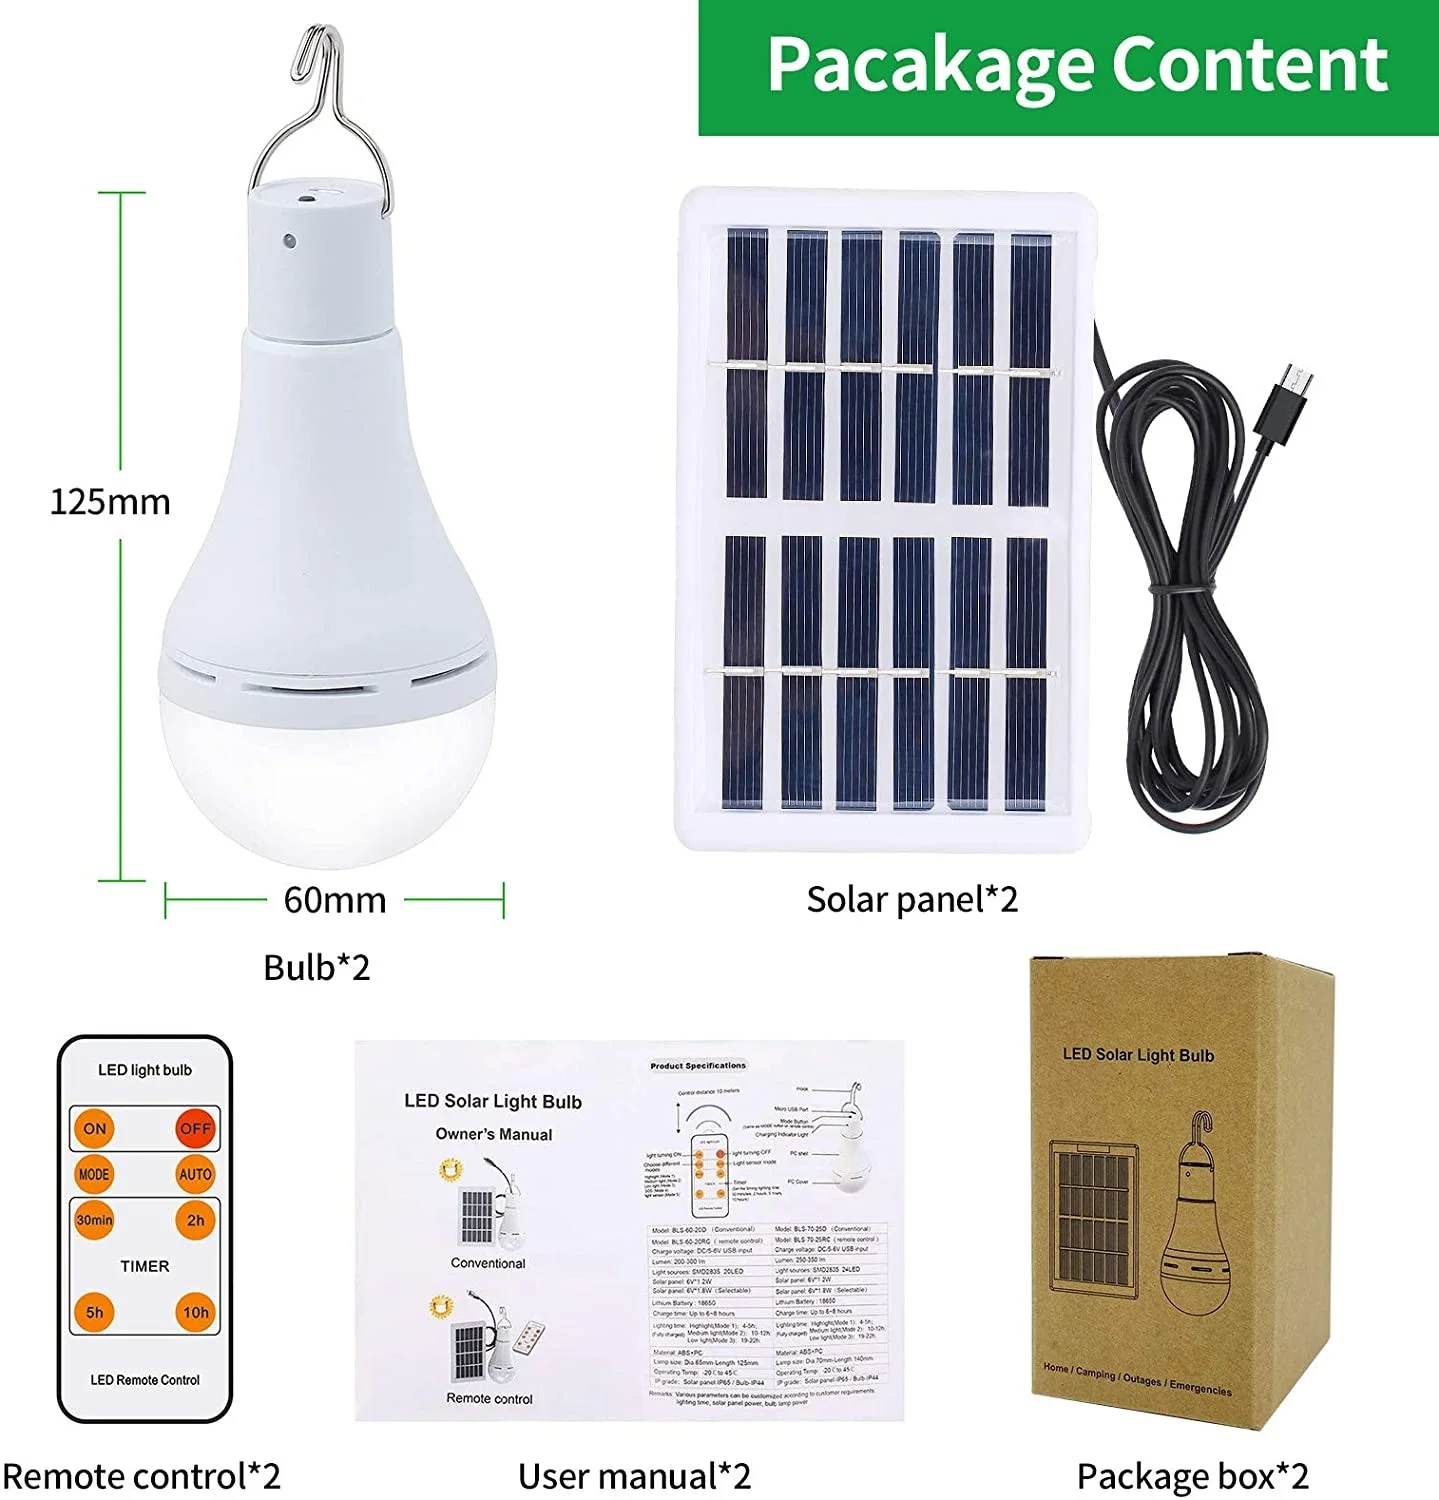 https://ae01.alicdn.com/kf/U17be2a078e724491840b73c2fc411154G/Solar-Light-Bulb-For-Chicken-Coop-Led-USB-Remote-Timer-Sensor-Powered-Heater-Emergency-Rechargeable-Storage.jpg